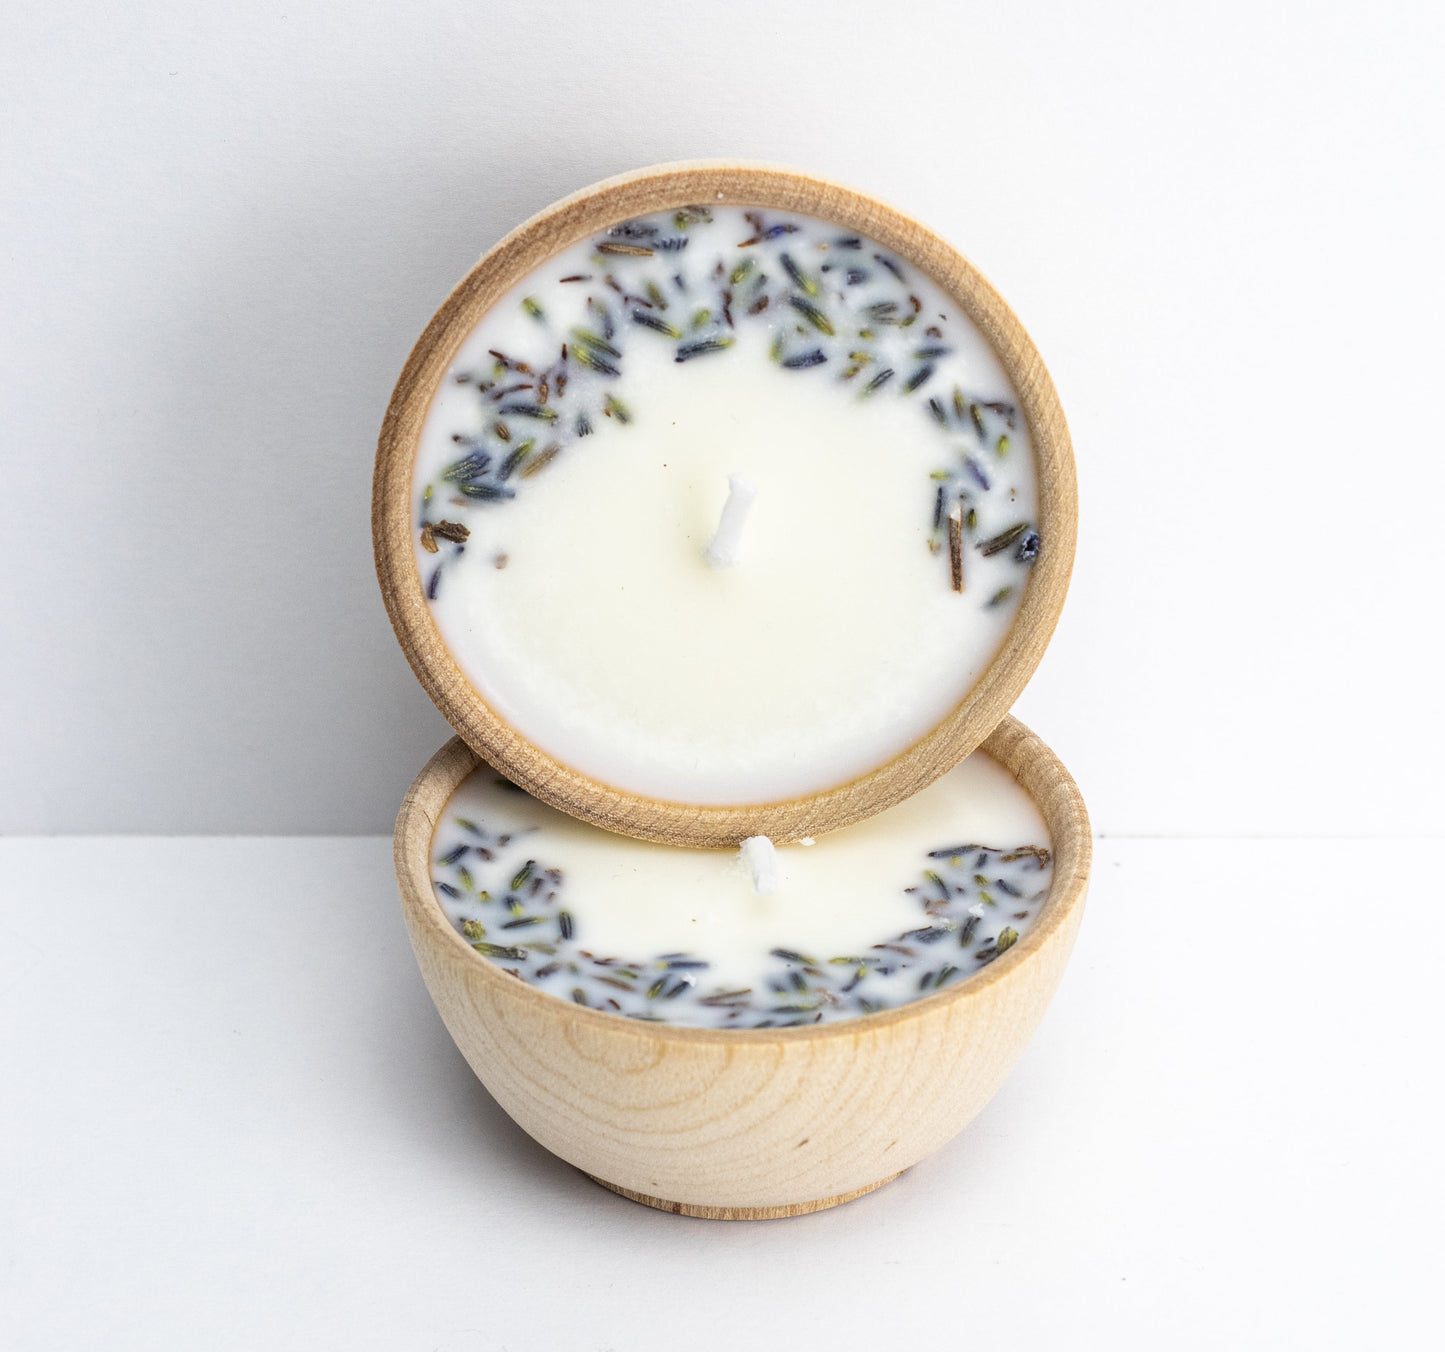 Wooden Tealight Aromatherapy Soy Candle, 1oz